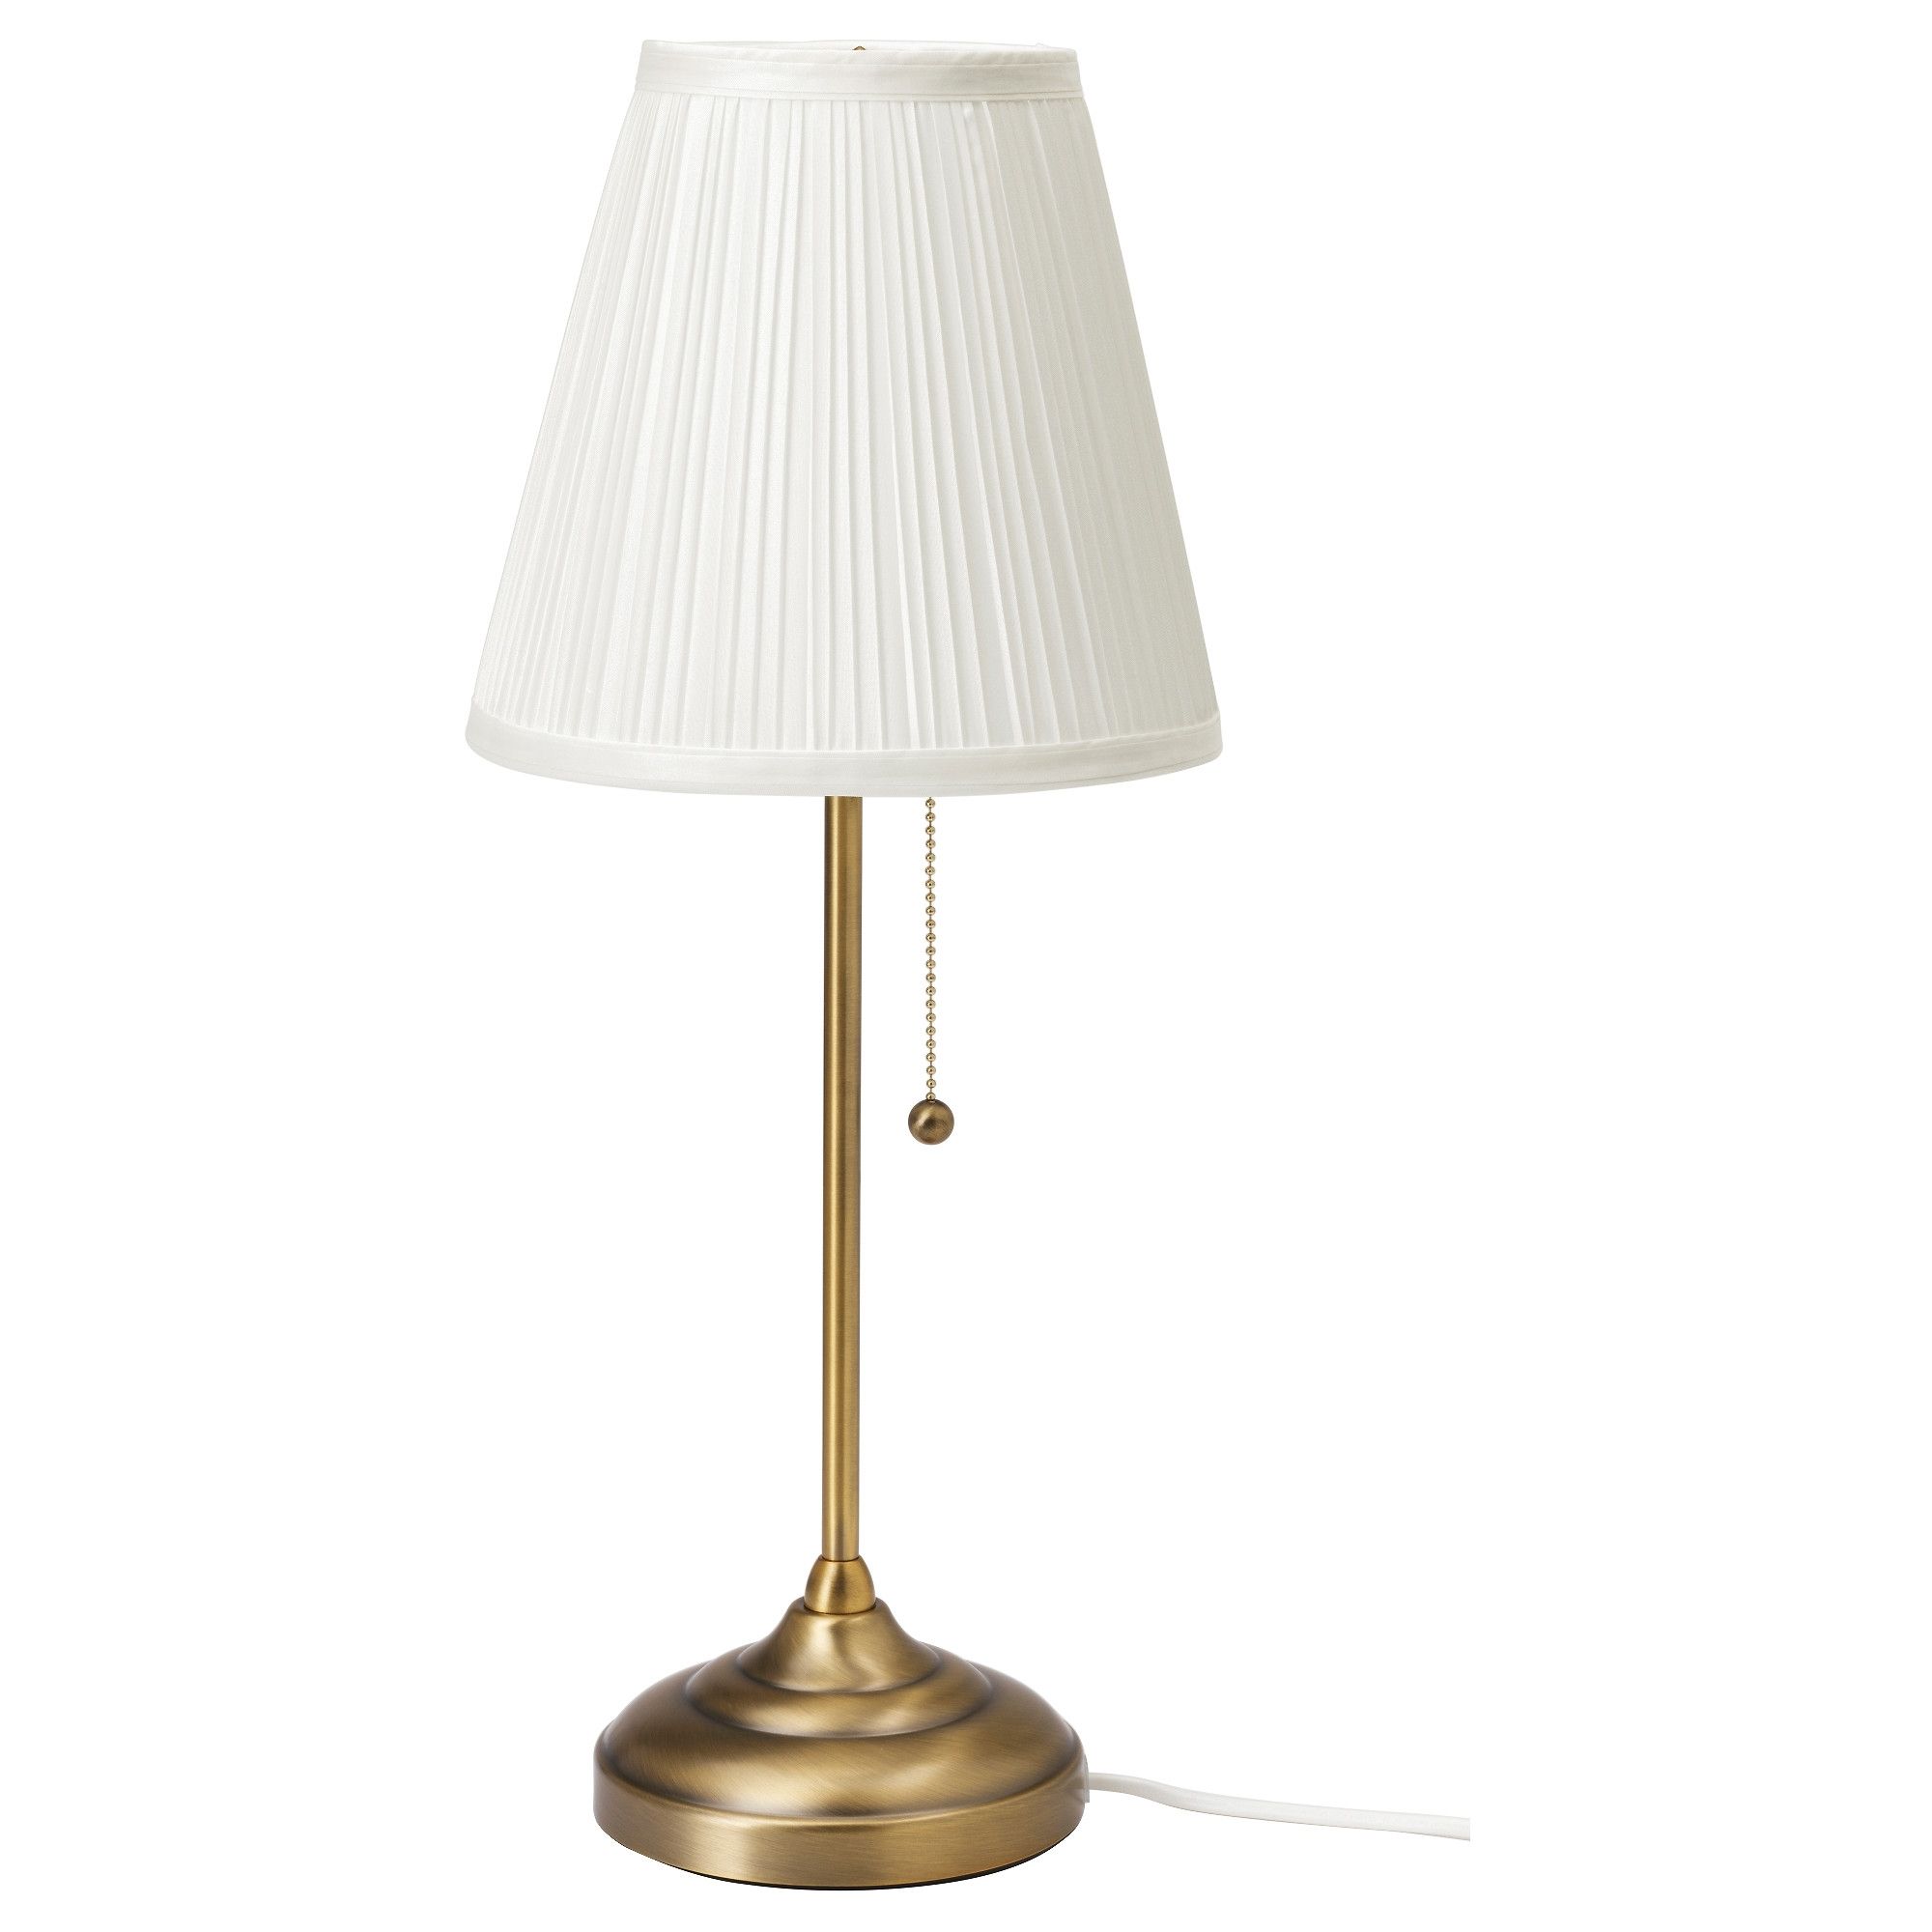 Top 53 Hunky Dory Large Table Lamps For Living Room Bedside Lights With Living Room Table Lamps At Ikea (View 14 of 15)